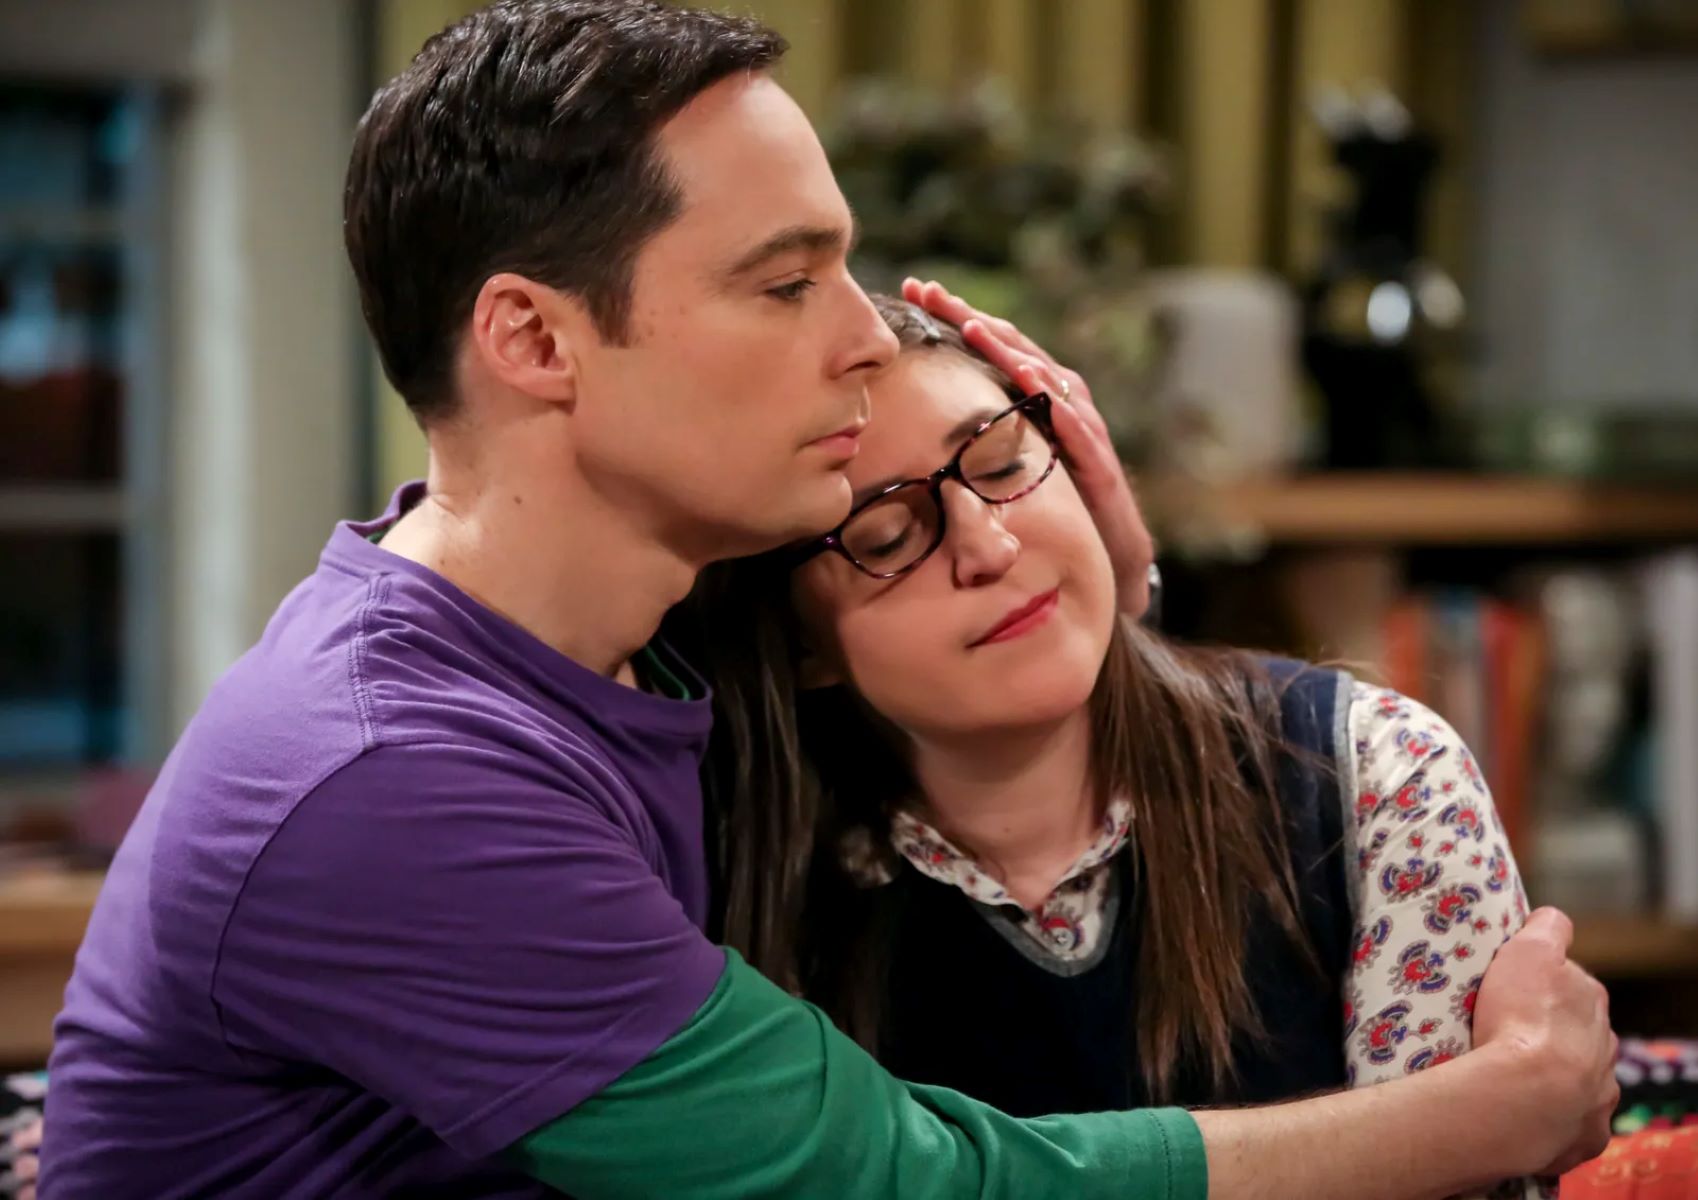 The Surprising Inspiration Behind Sheldon Cooper On 'The Big Bang Theory'